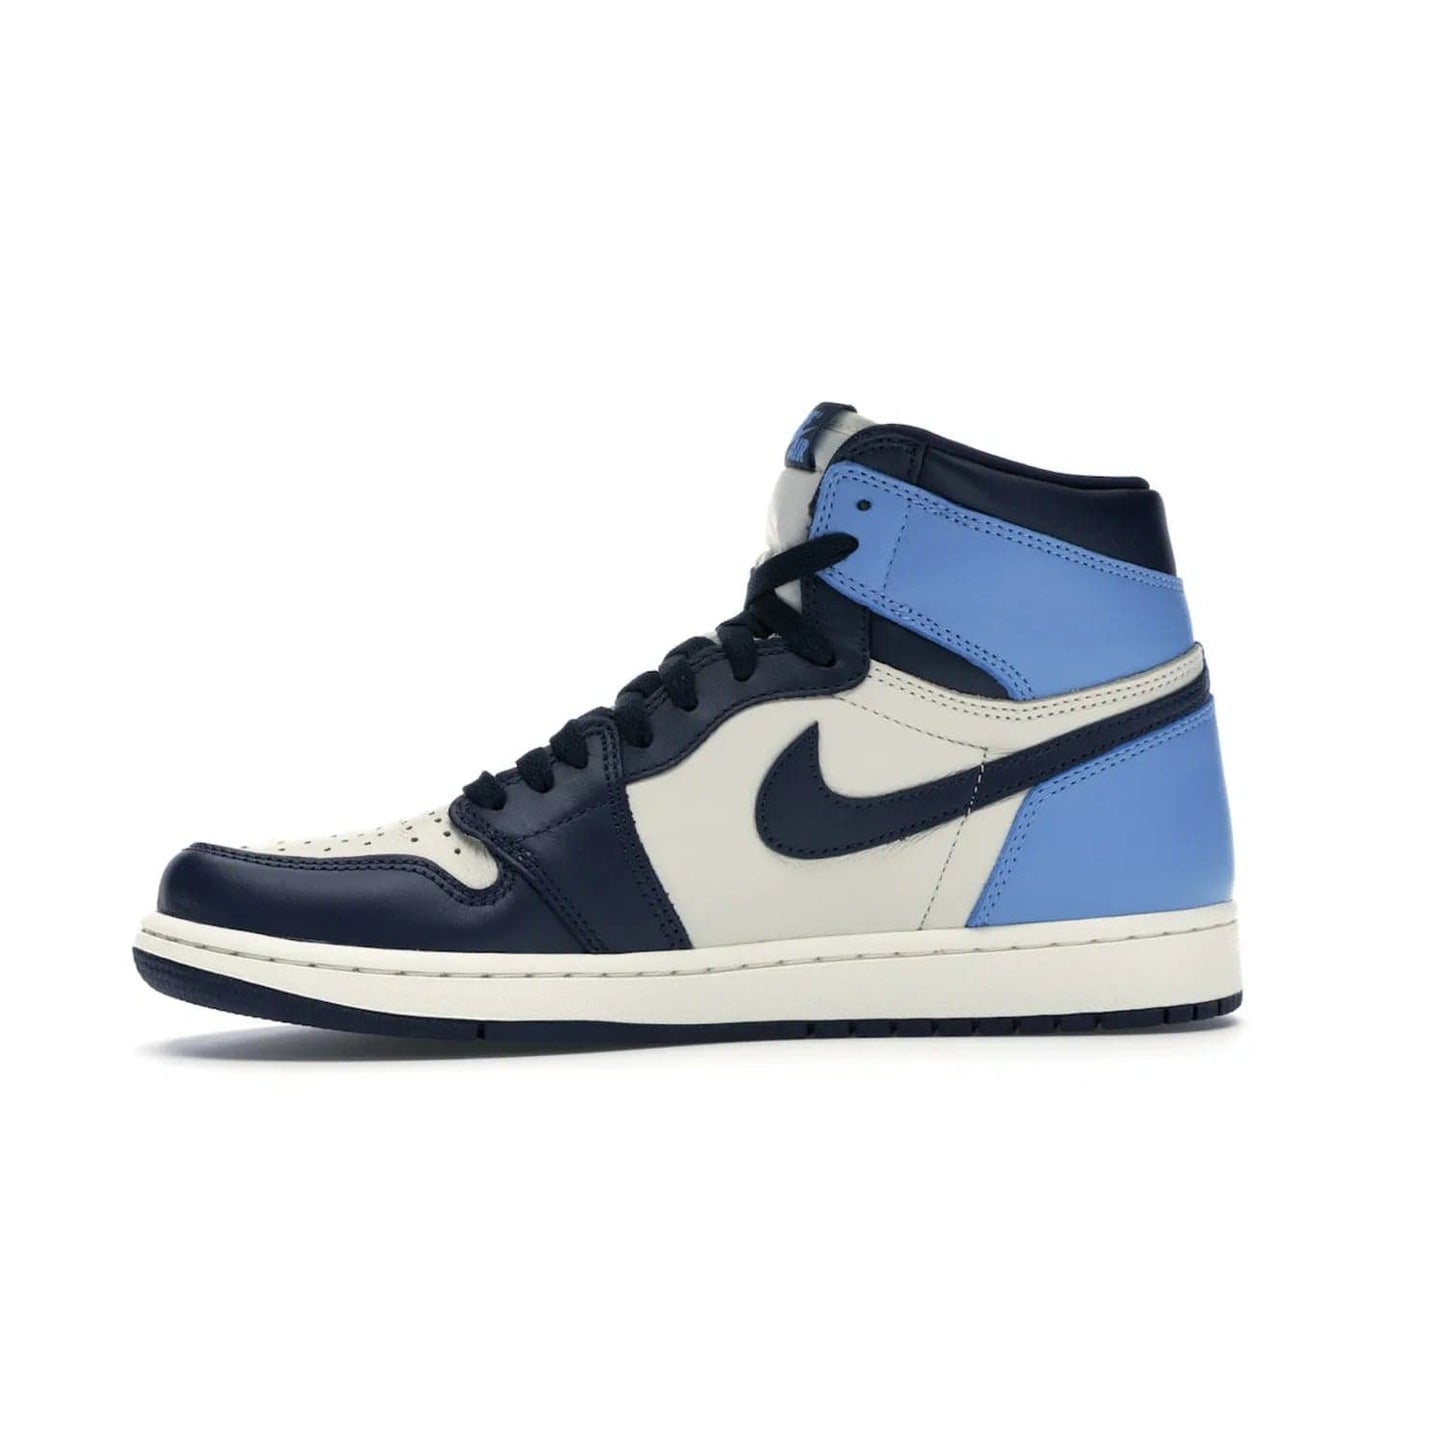 Jordan 1 Retro High Obsidian UNC - Image 18 - Only at www.BallersClubKickz.com - Bring a timeless classic to your wardrobe with the Air Jordan 1 Retro High "Obsidian/University Blue”. A full leather upper combines Obsidian and University Blue detailing for a retro Jordan style. Stitched Jumpman logo pays tribute to UNC. Experience classic style with a timeless sneaker.